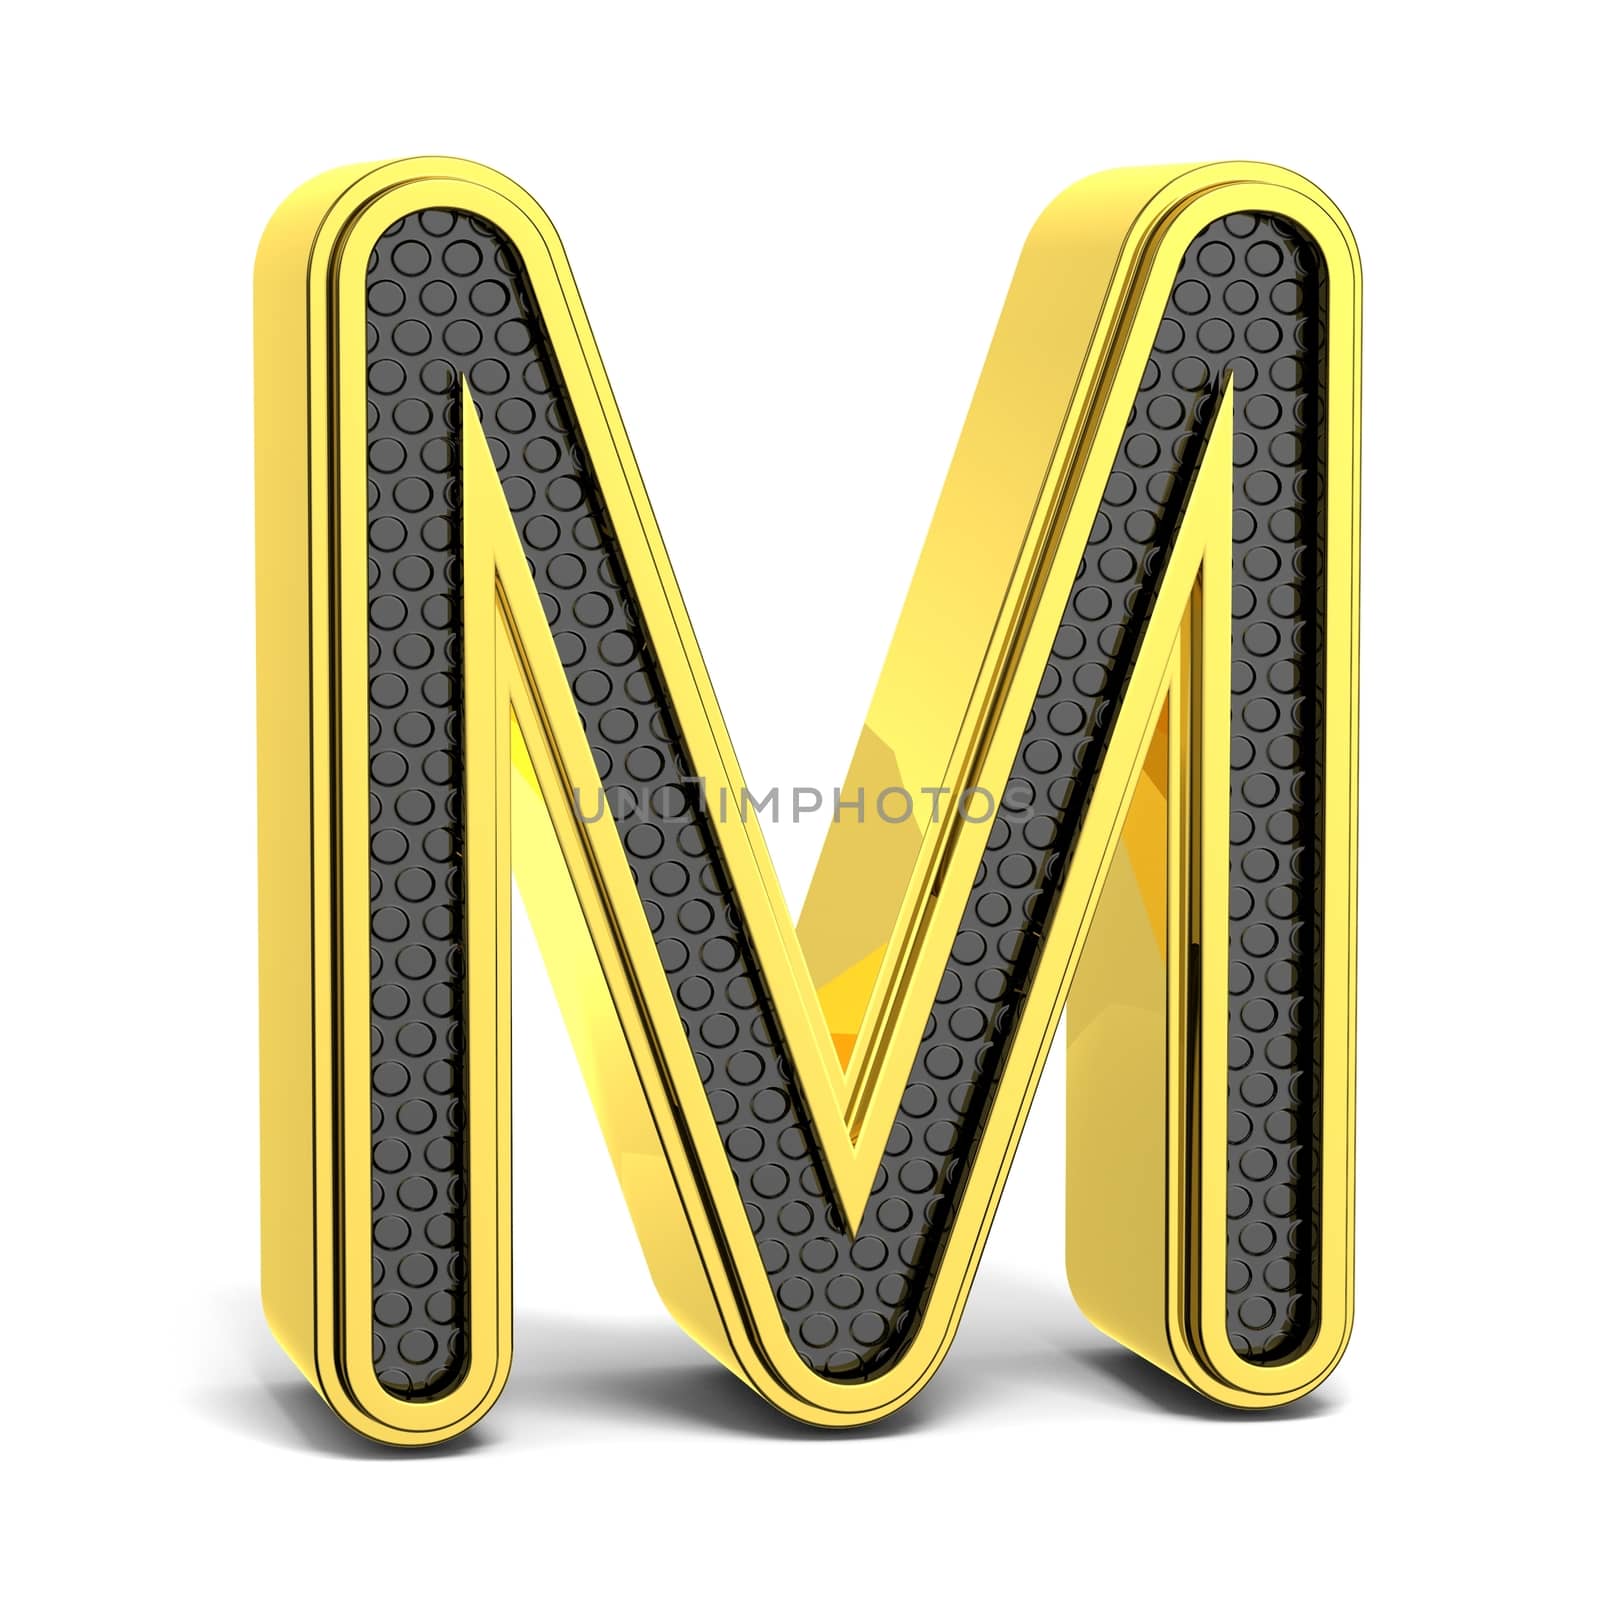 Golden and black round alphabet. Letter M. 3D render illustration isolated on white background with soft shadow